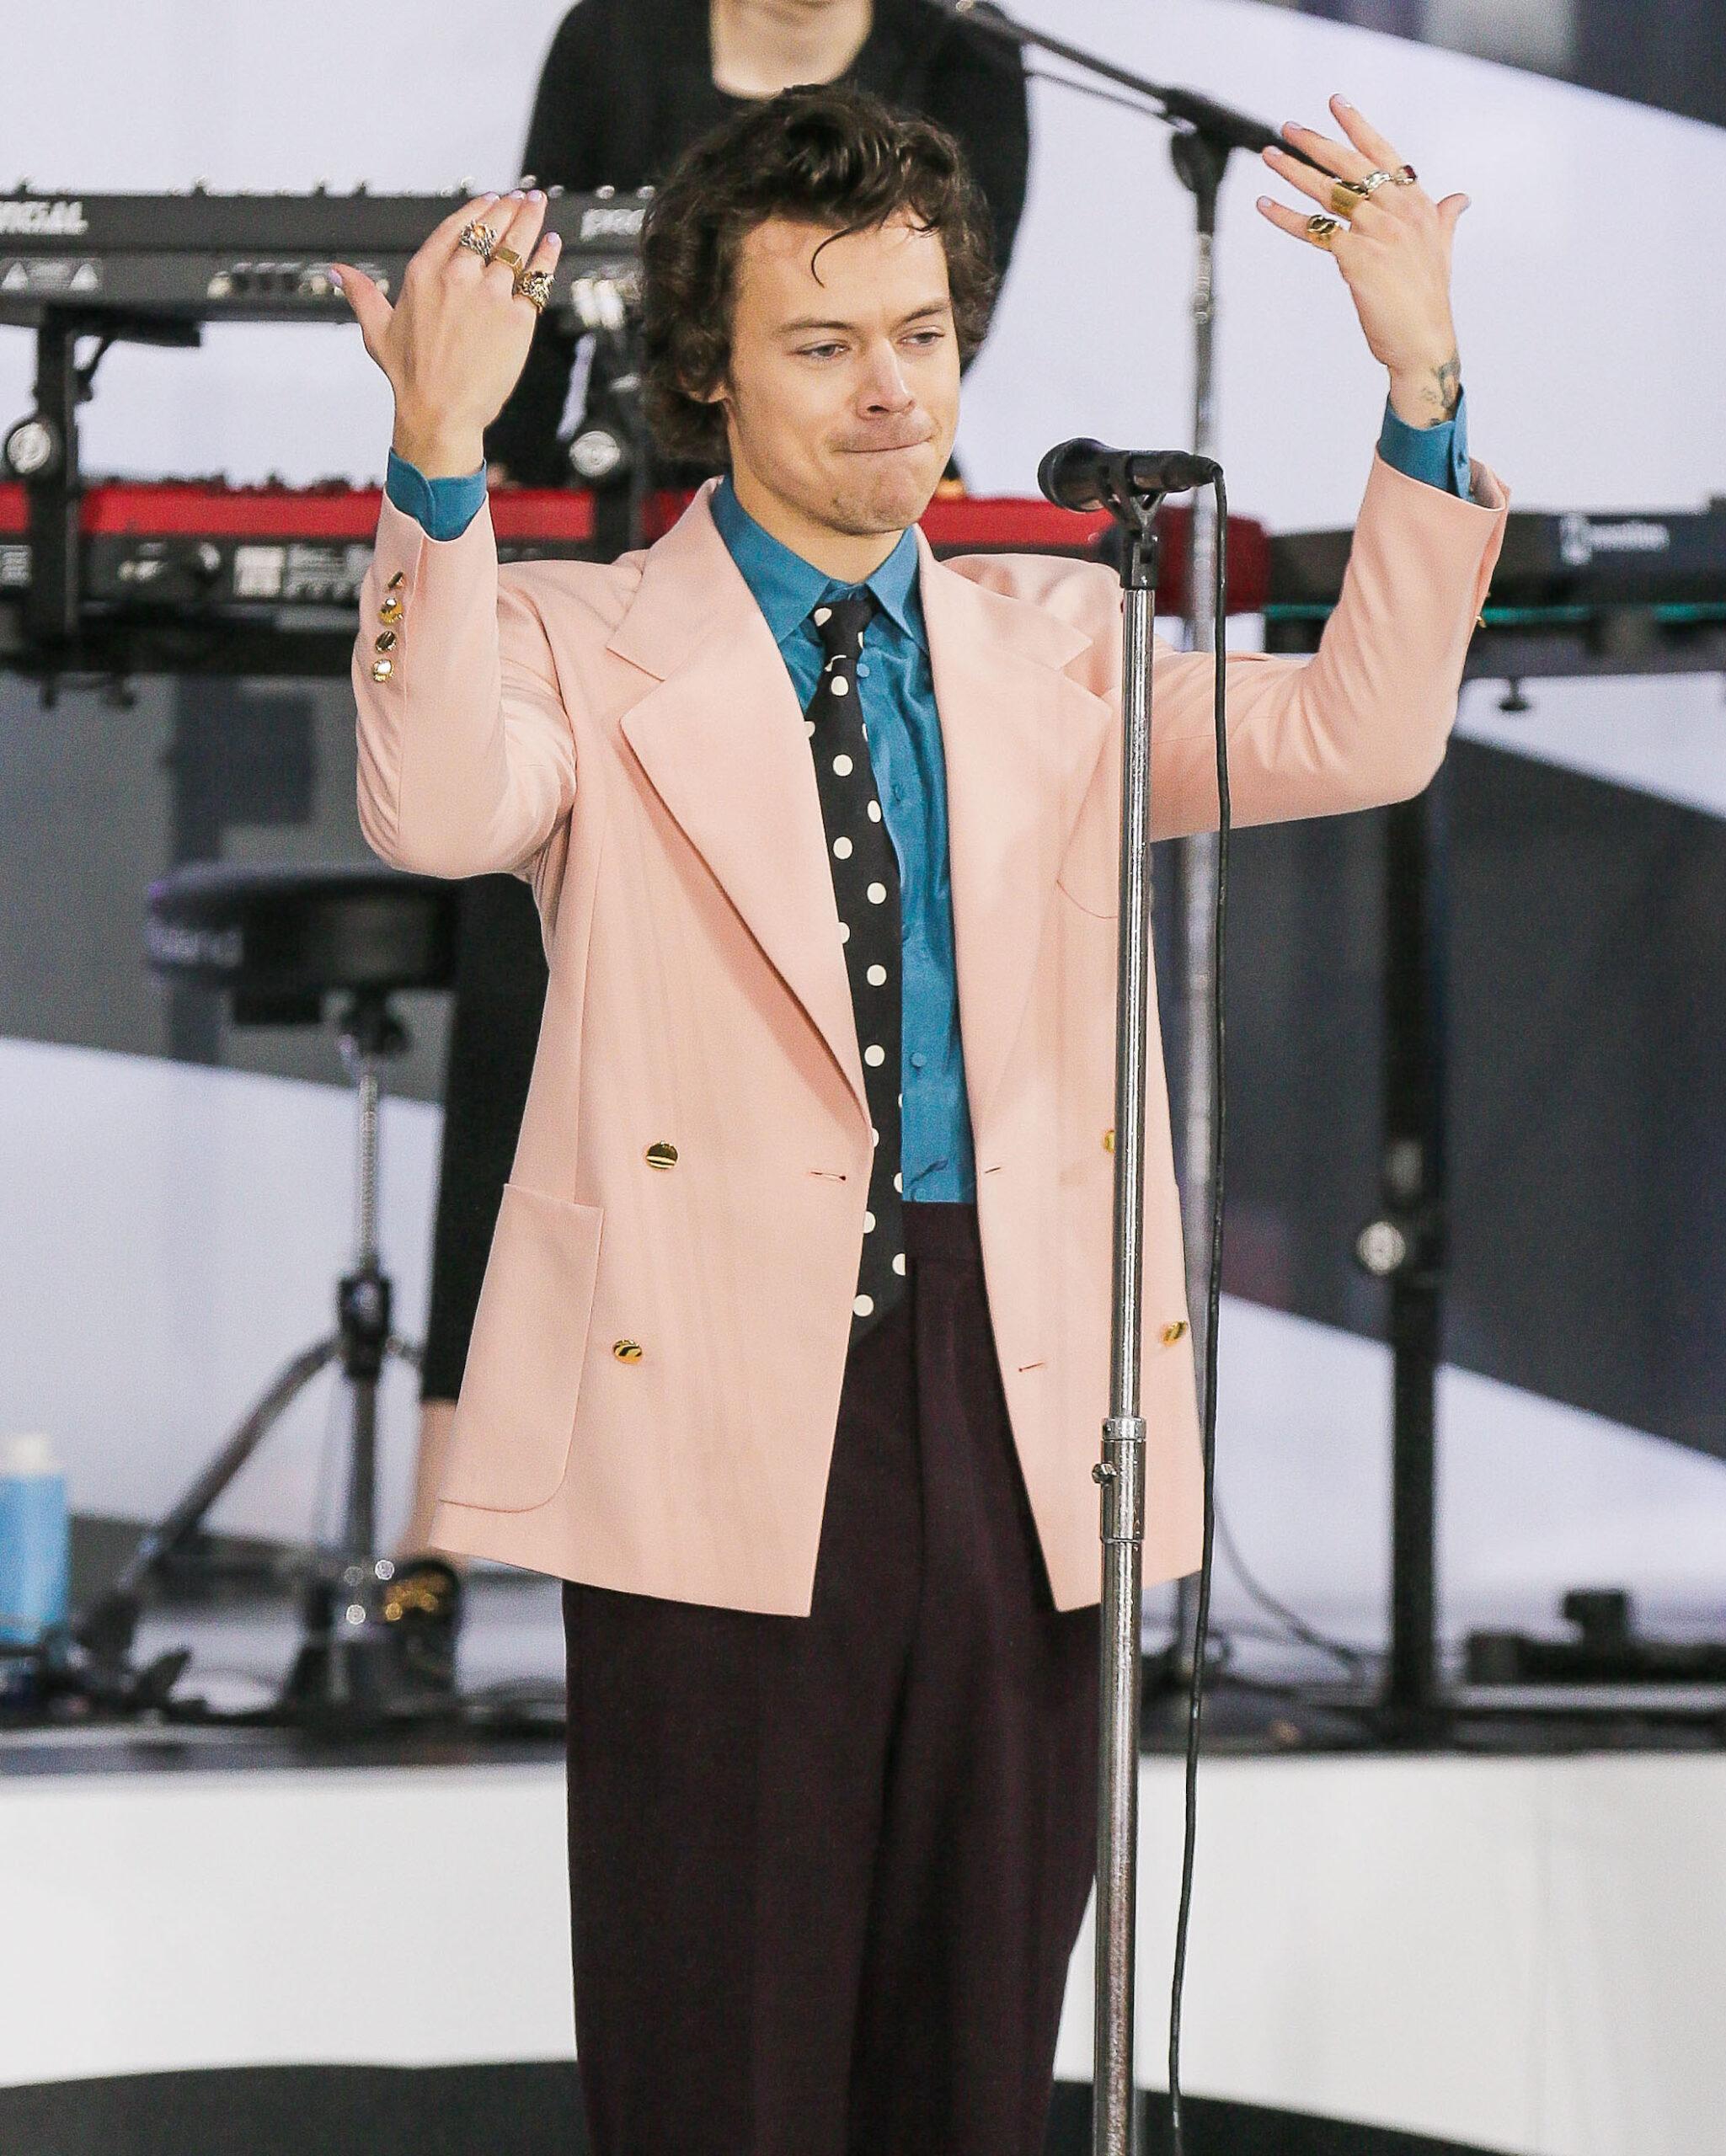 Harry Styles Performs On NBC's 'Today' Show